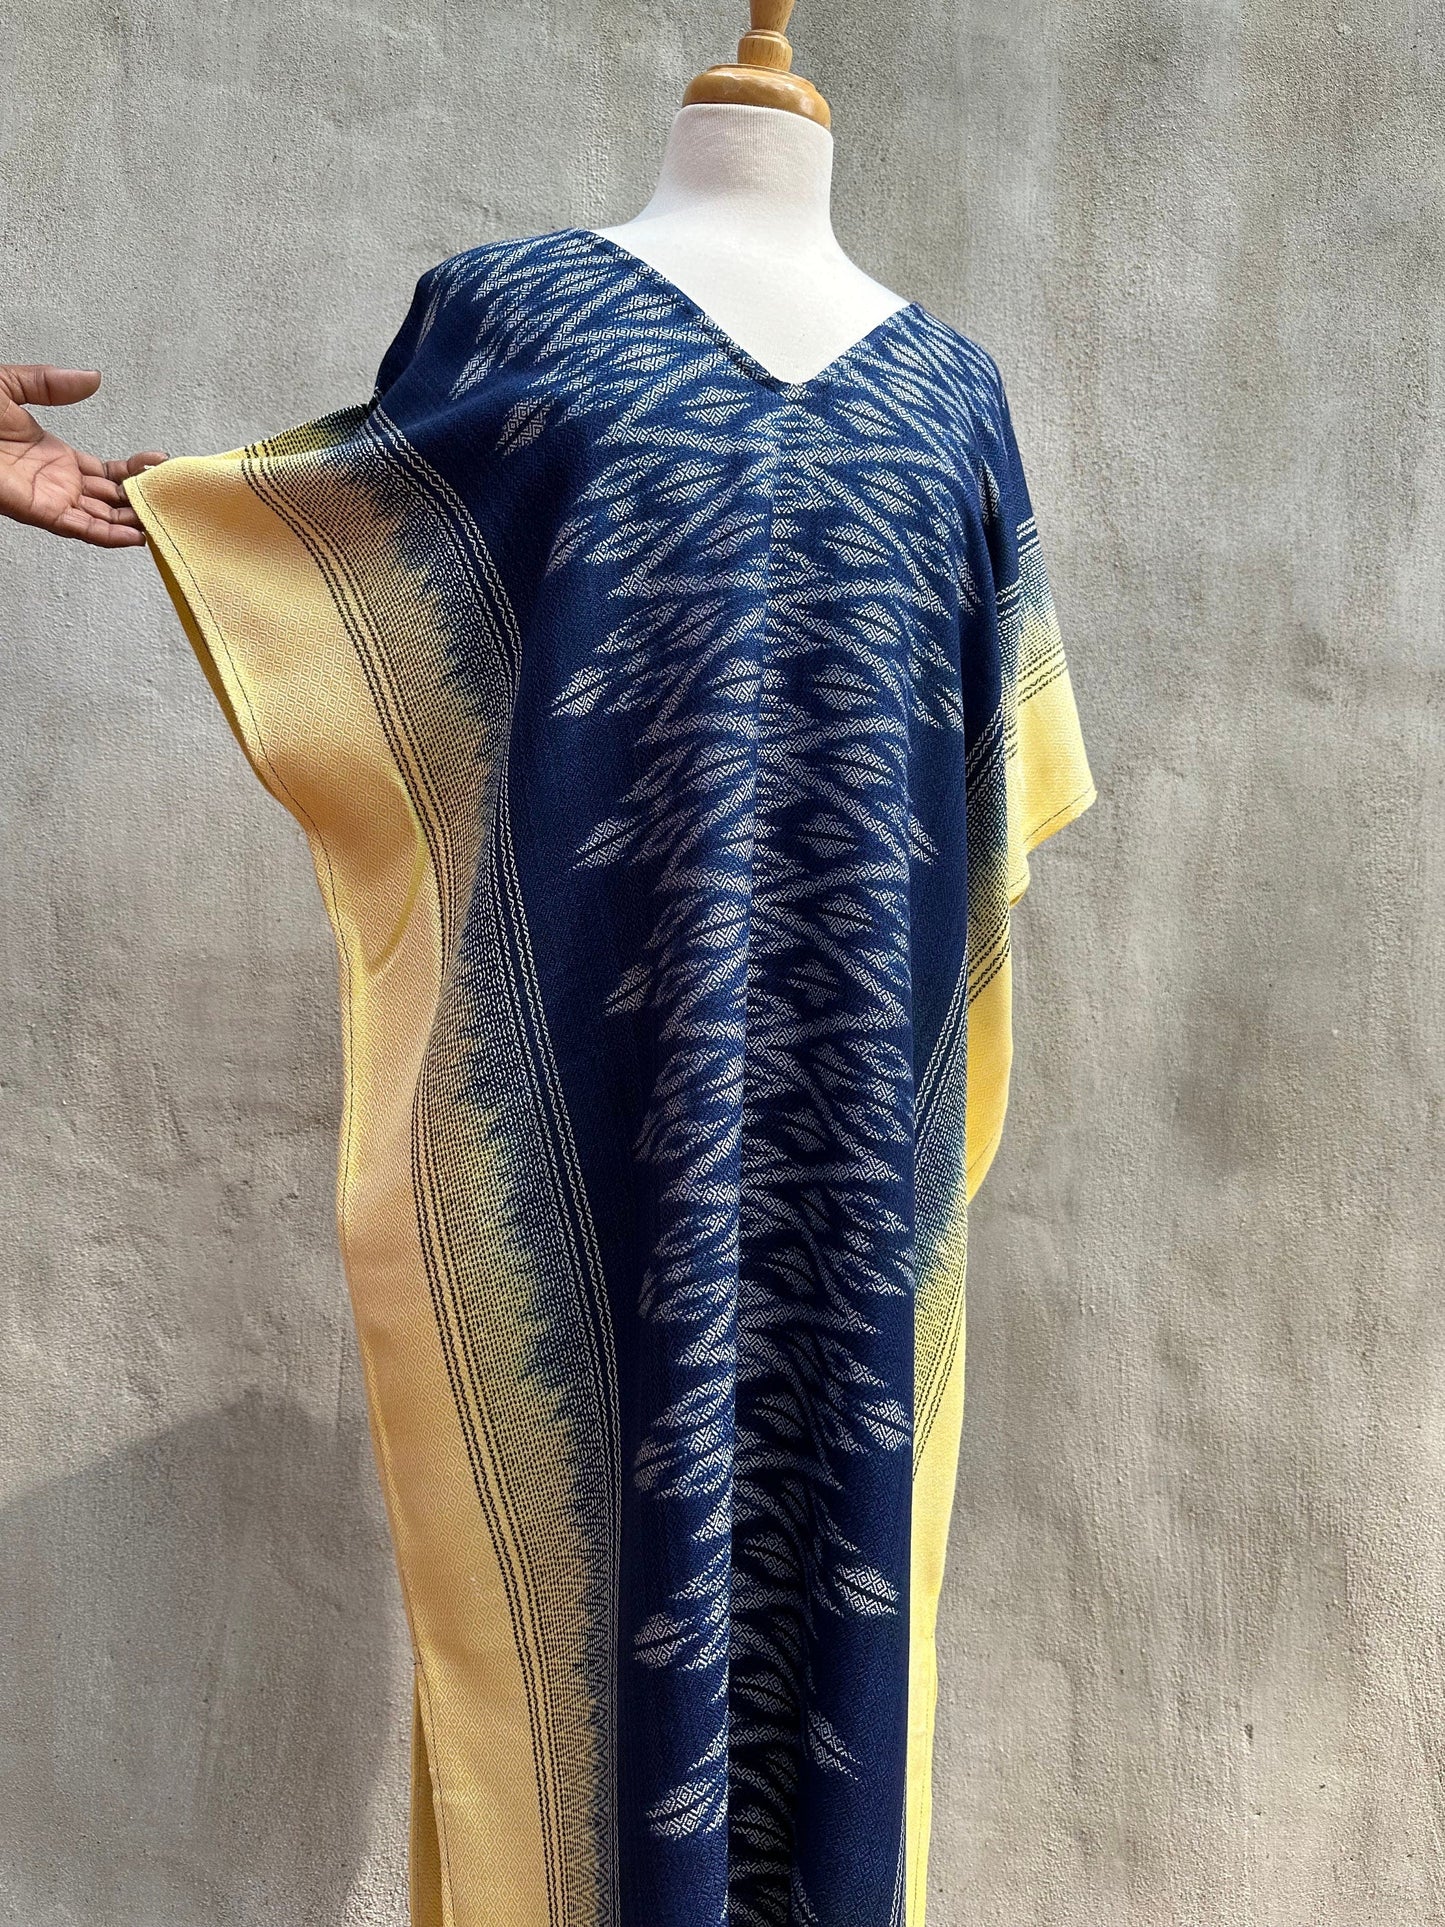 MALA handworks  Ikat Hand Woven Pattern Kaftan in Indigo Blue with Light Yellow and White